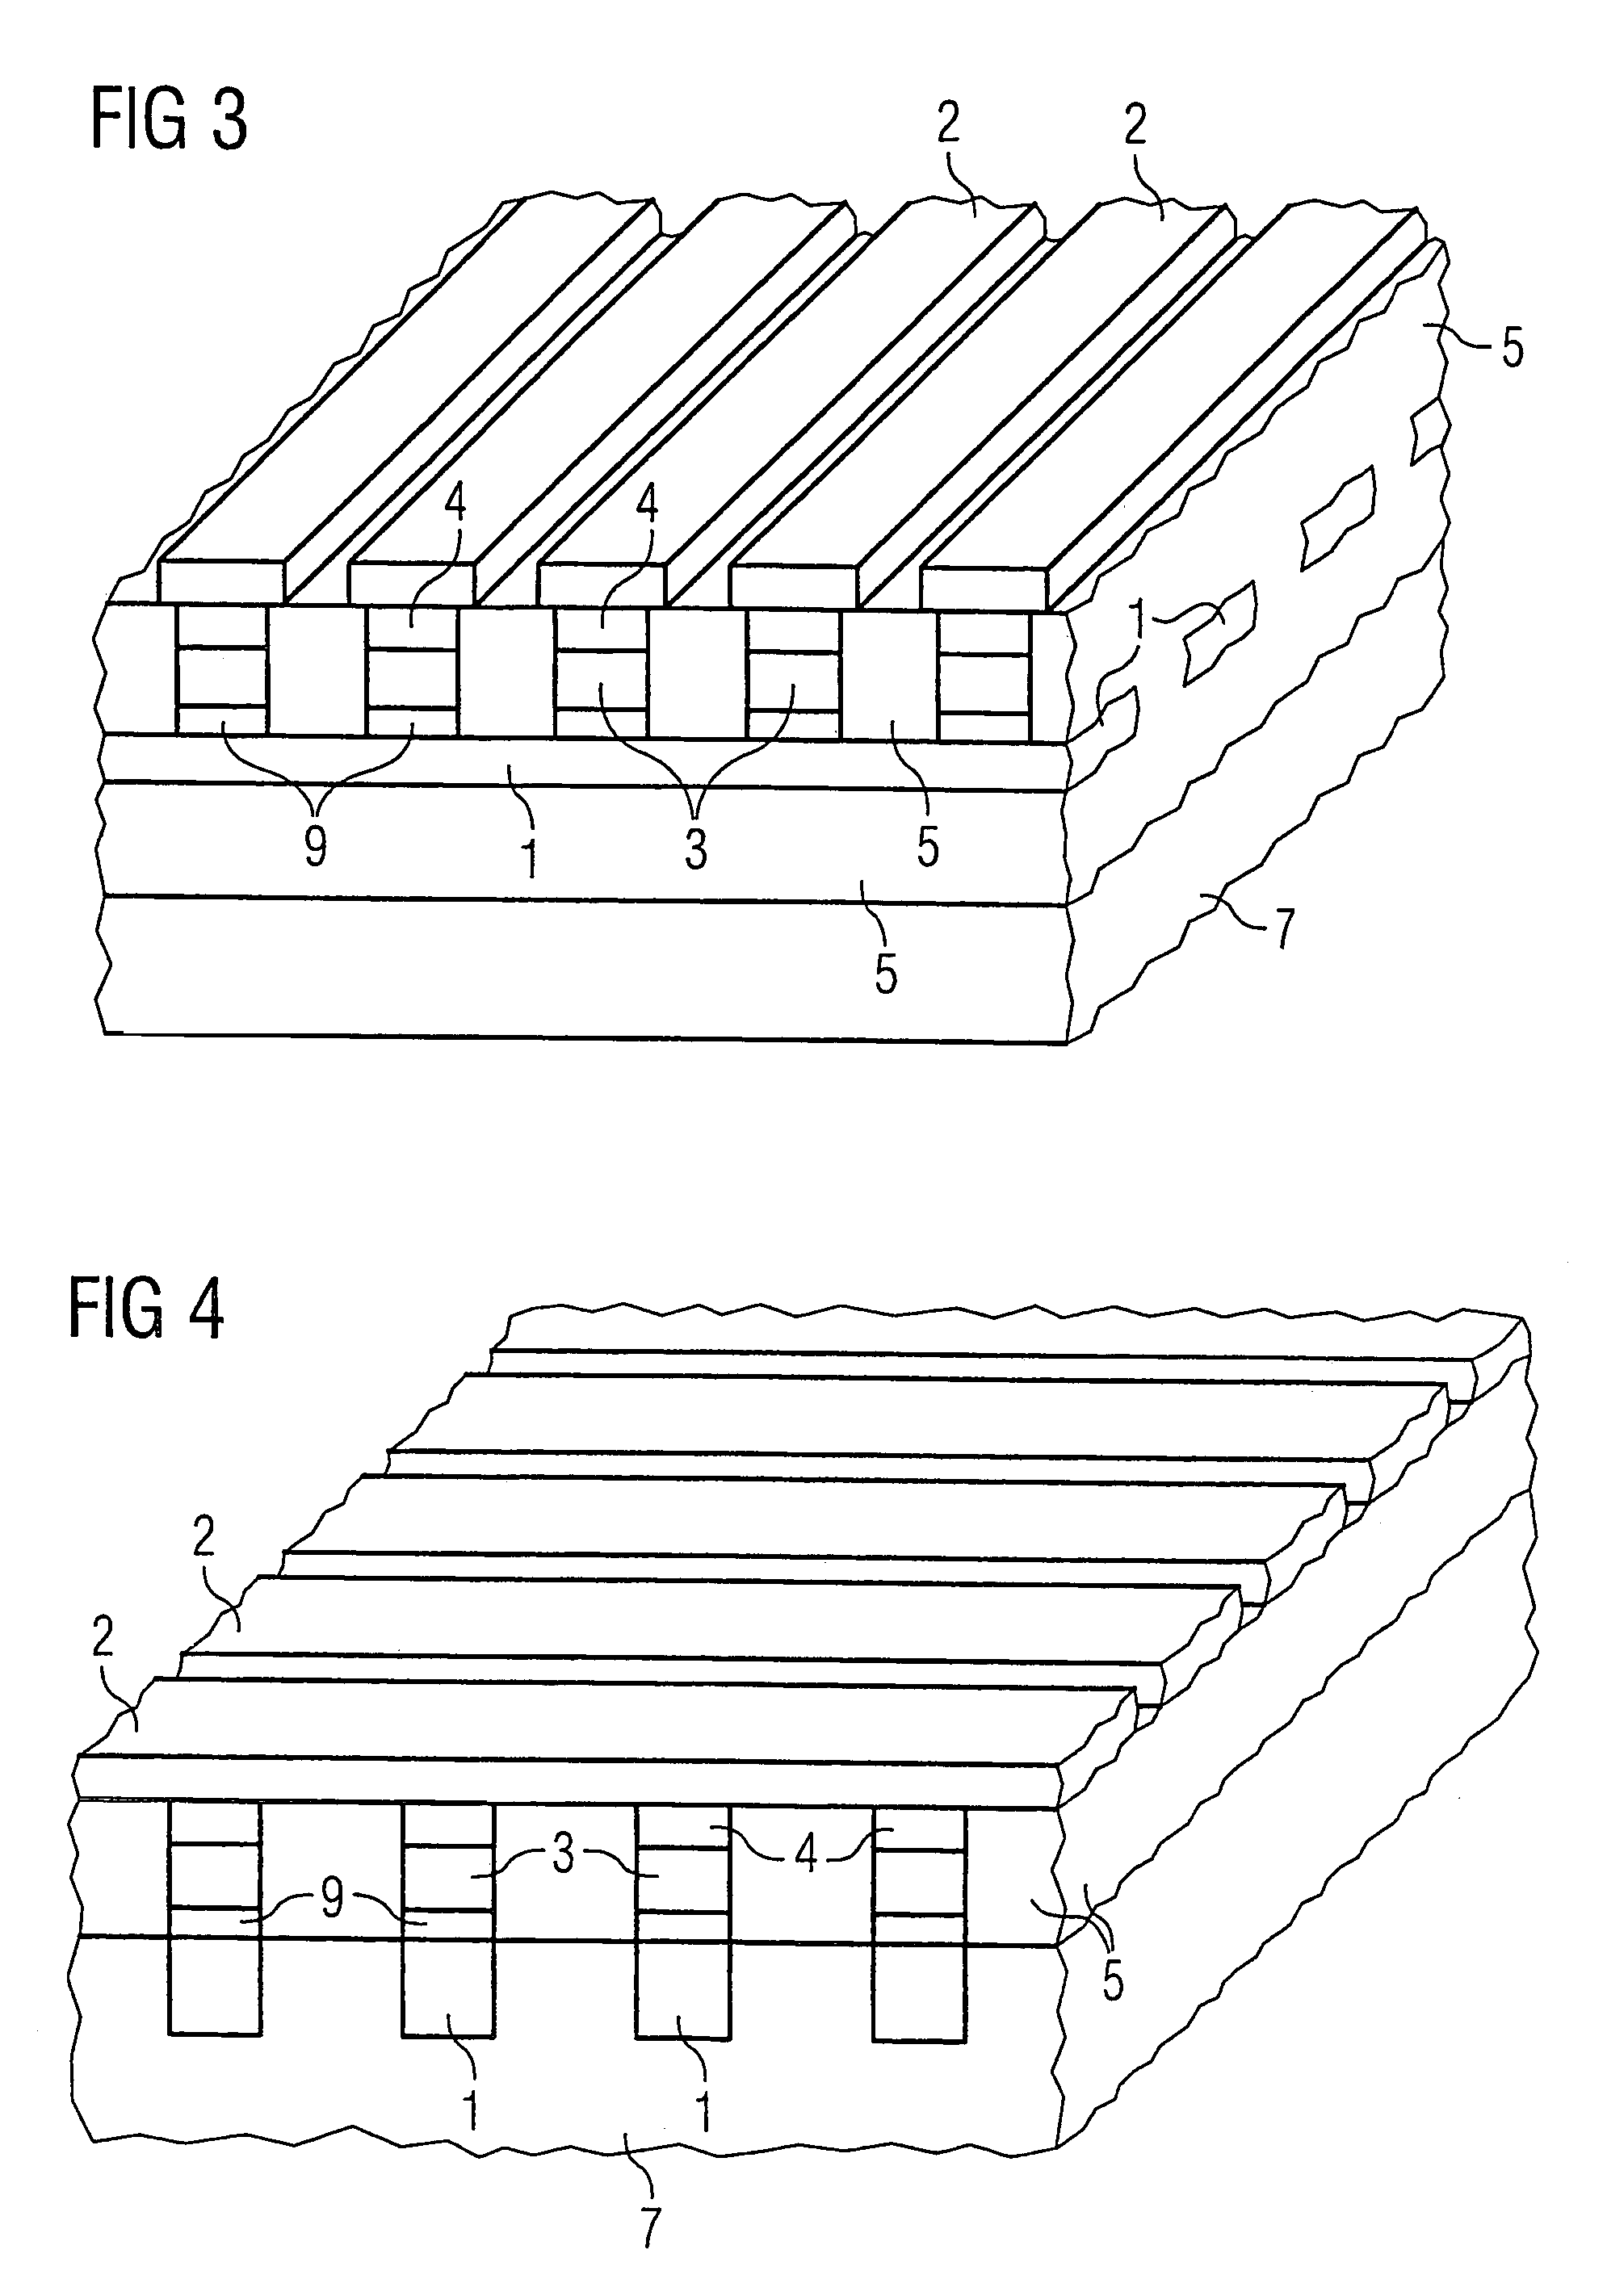 Semiconductor memory component in cross-point architecture